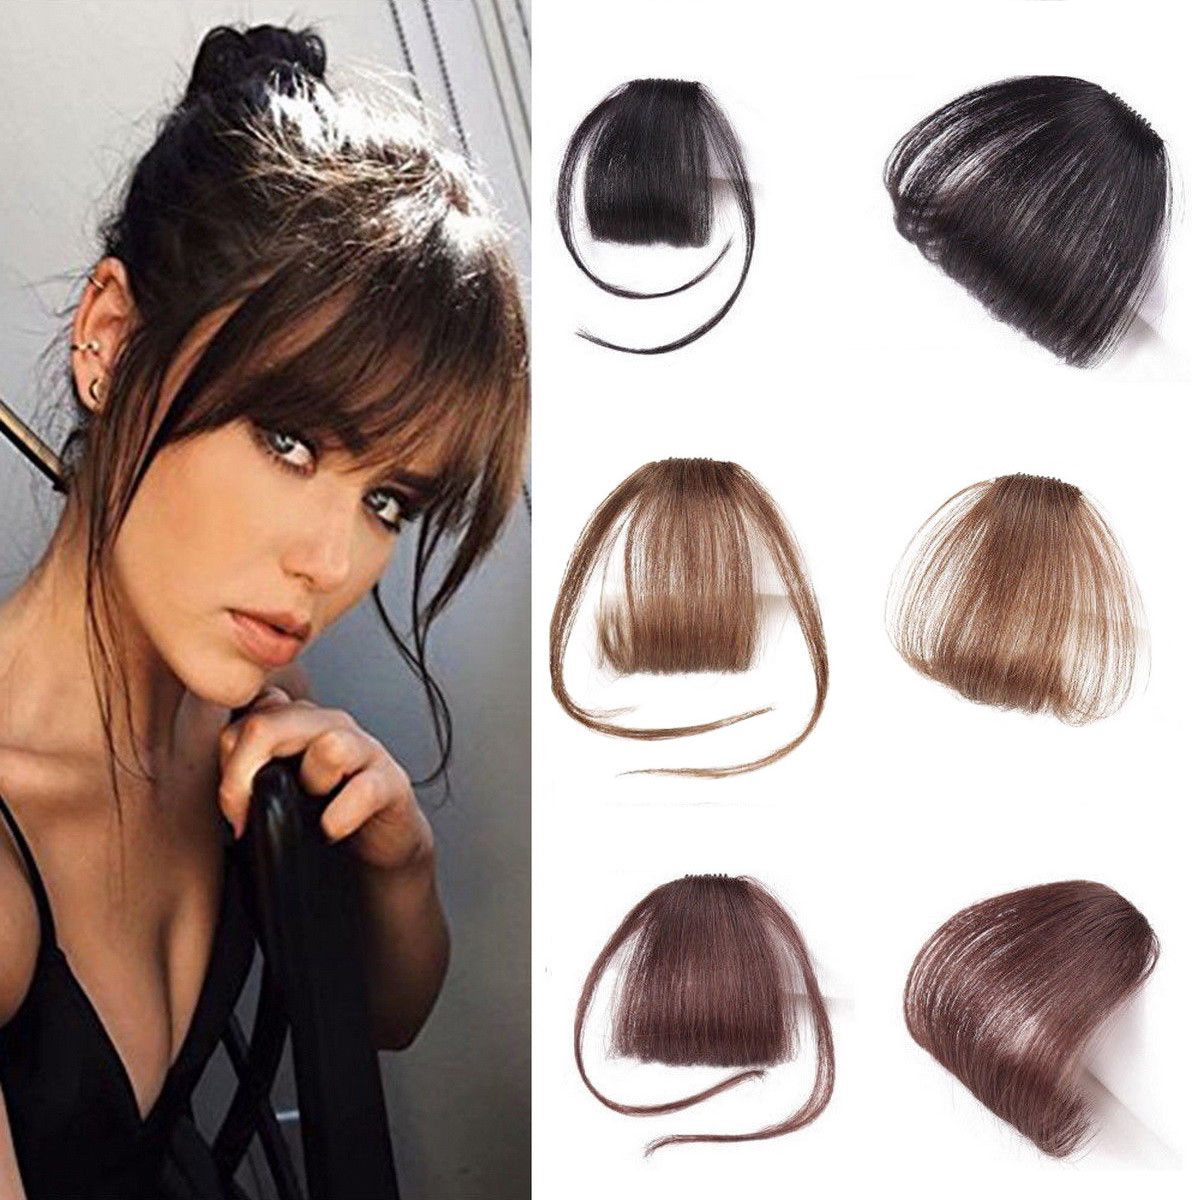 Details About Fashion Long Side Bang Clip In On Fringe Hair Extensions Front Neat Bangs